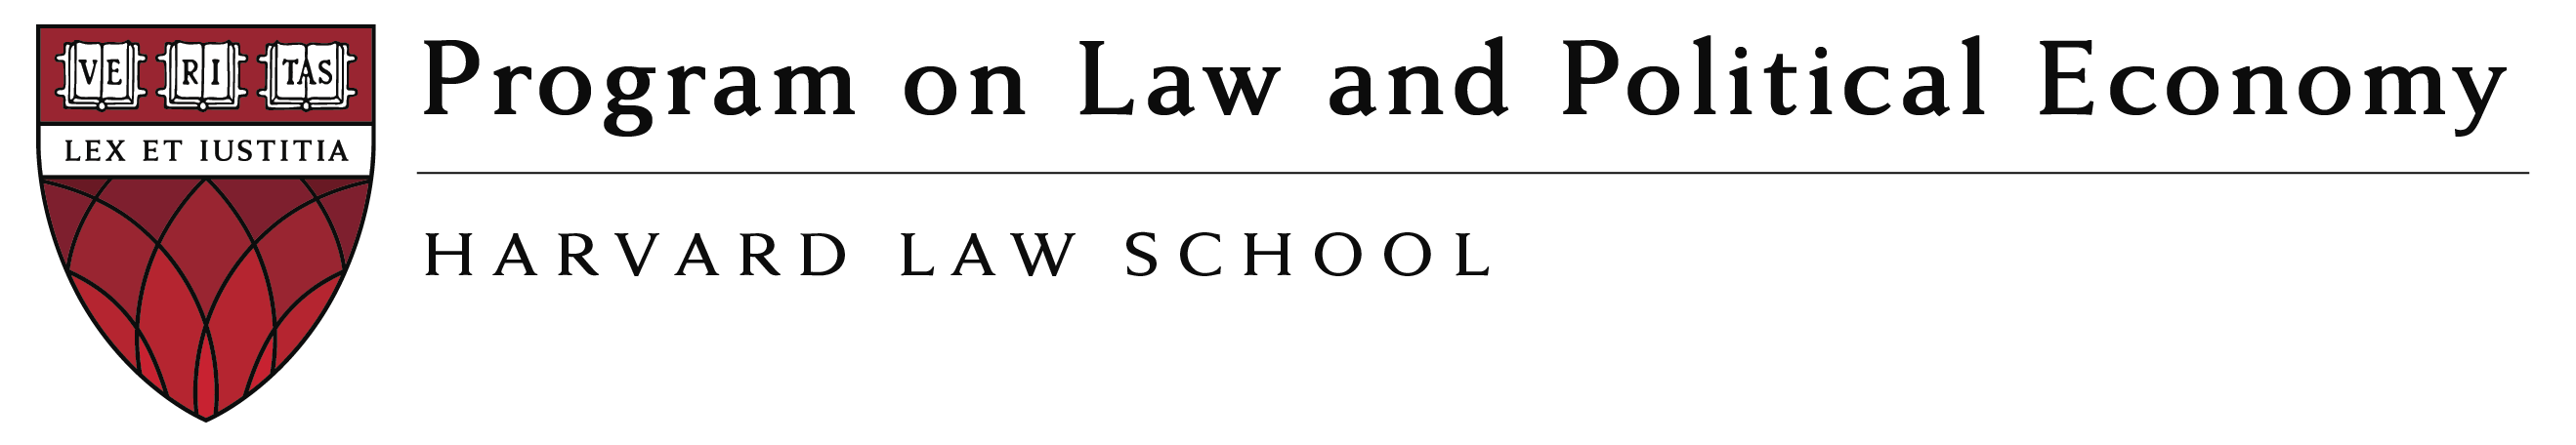 The Program on Law and Political Economy